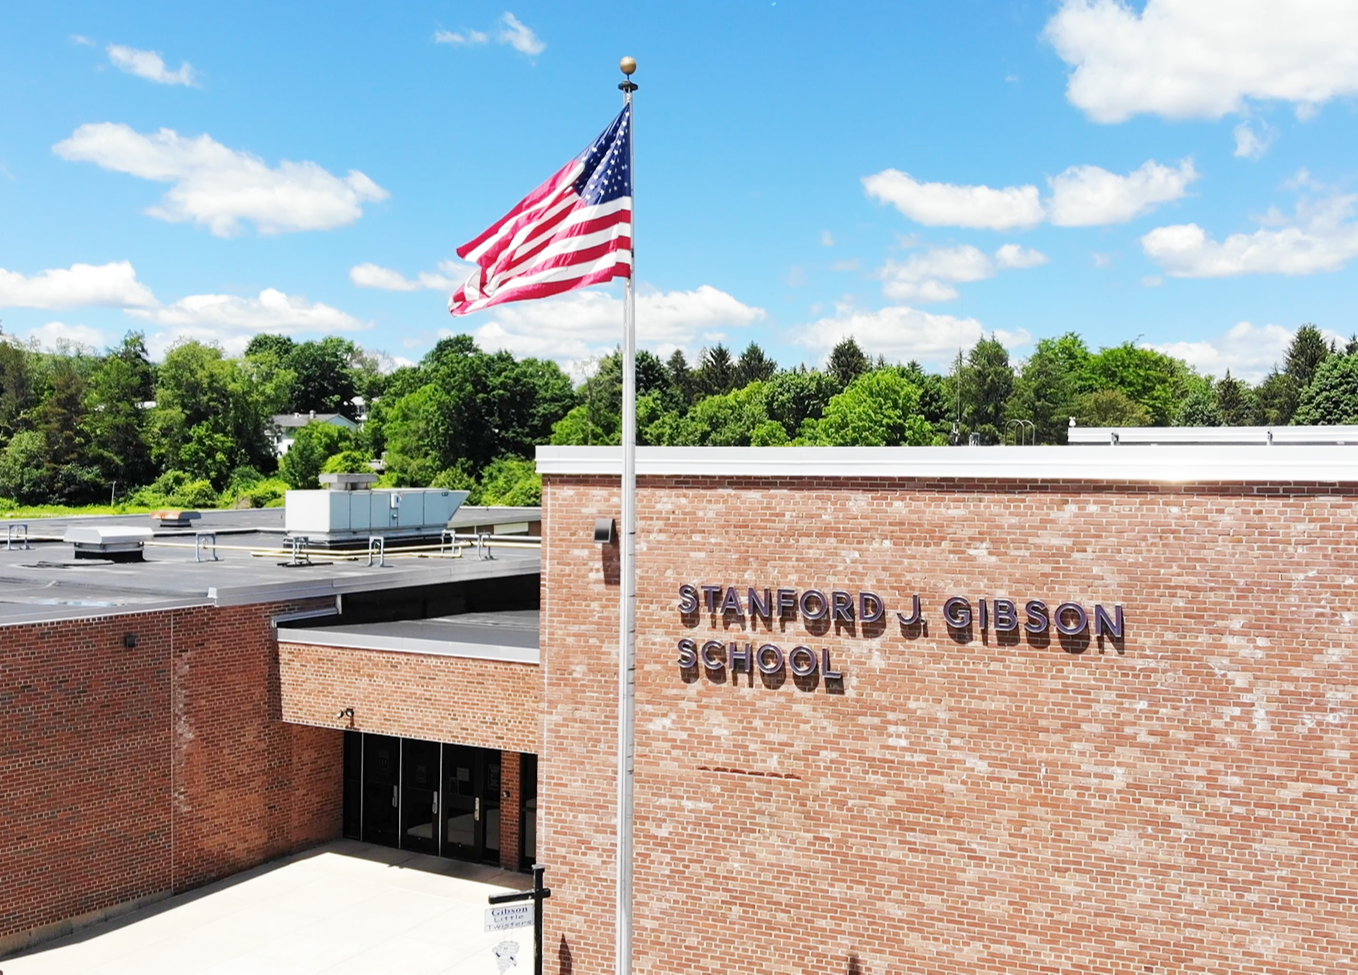 Stanford Gibson Primary